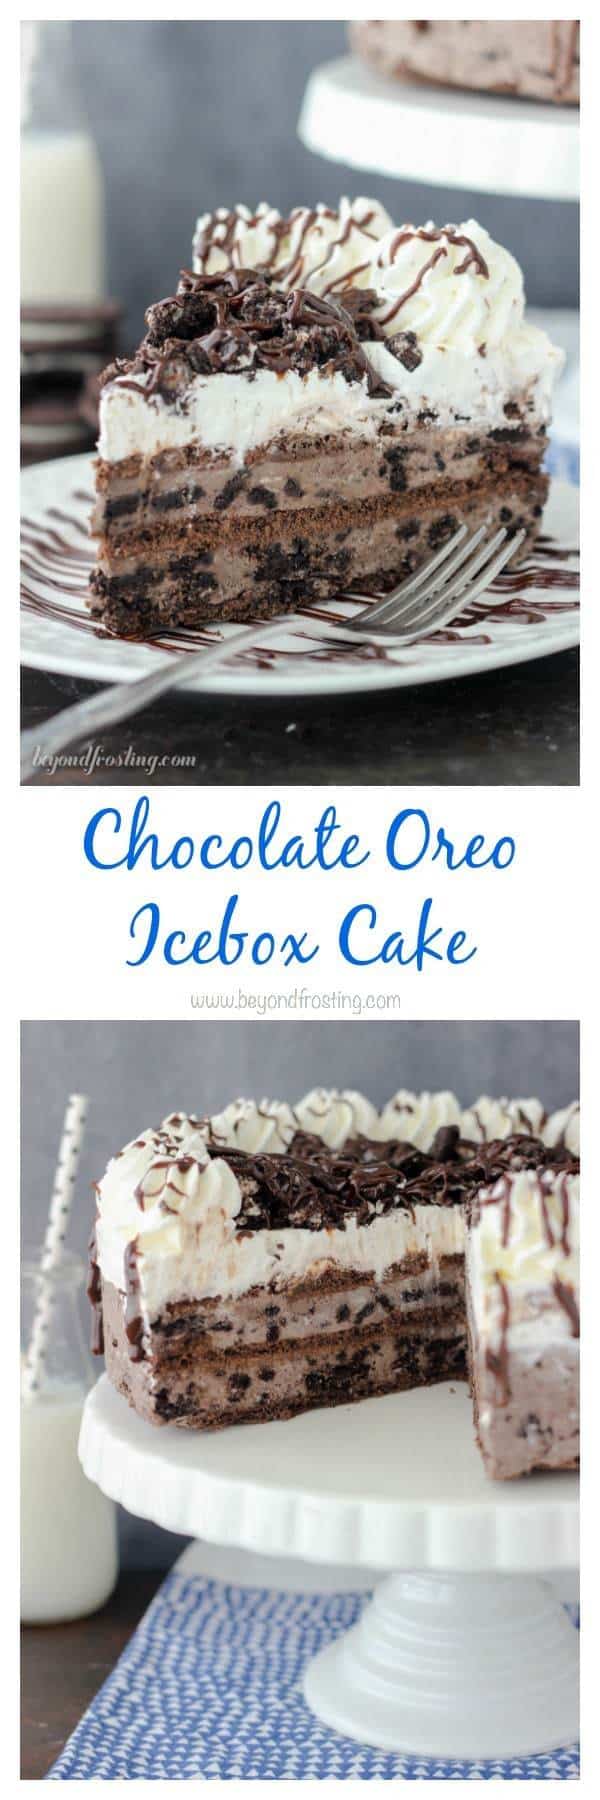 Cut yourself a big slice of this Chocolate Oreo Icebox Cake! The layers of chocolate Oreo mousse, chocolate graham crackers and whipped cream. Be sure to through a handful of Oreos and hot fudge sauce on top. Grab the recipe at beyondfrosting.com